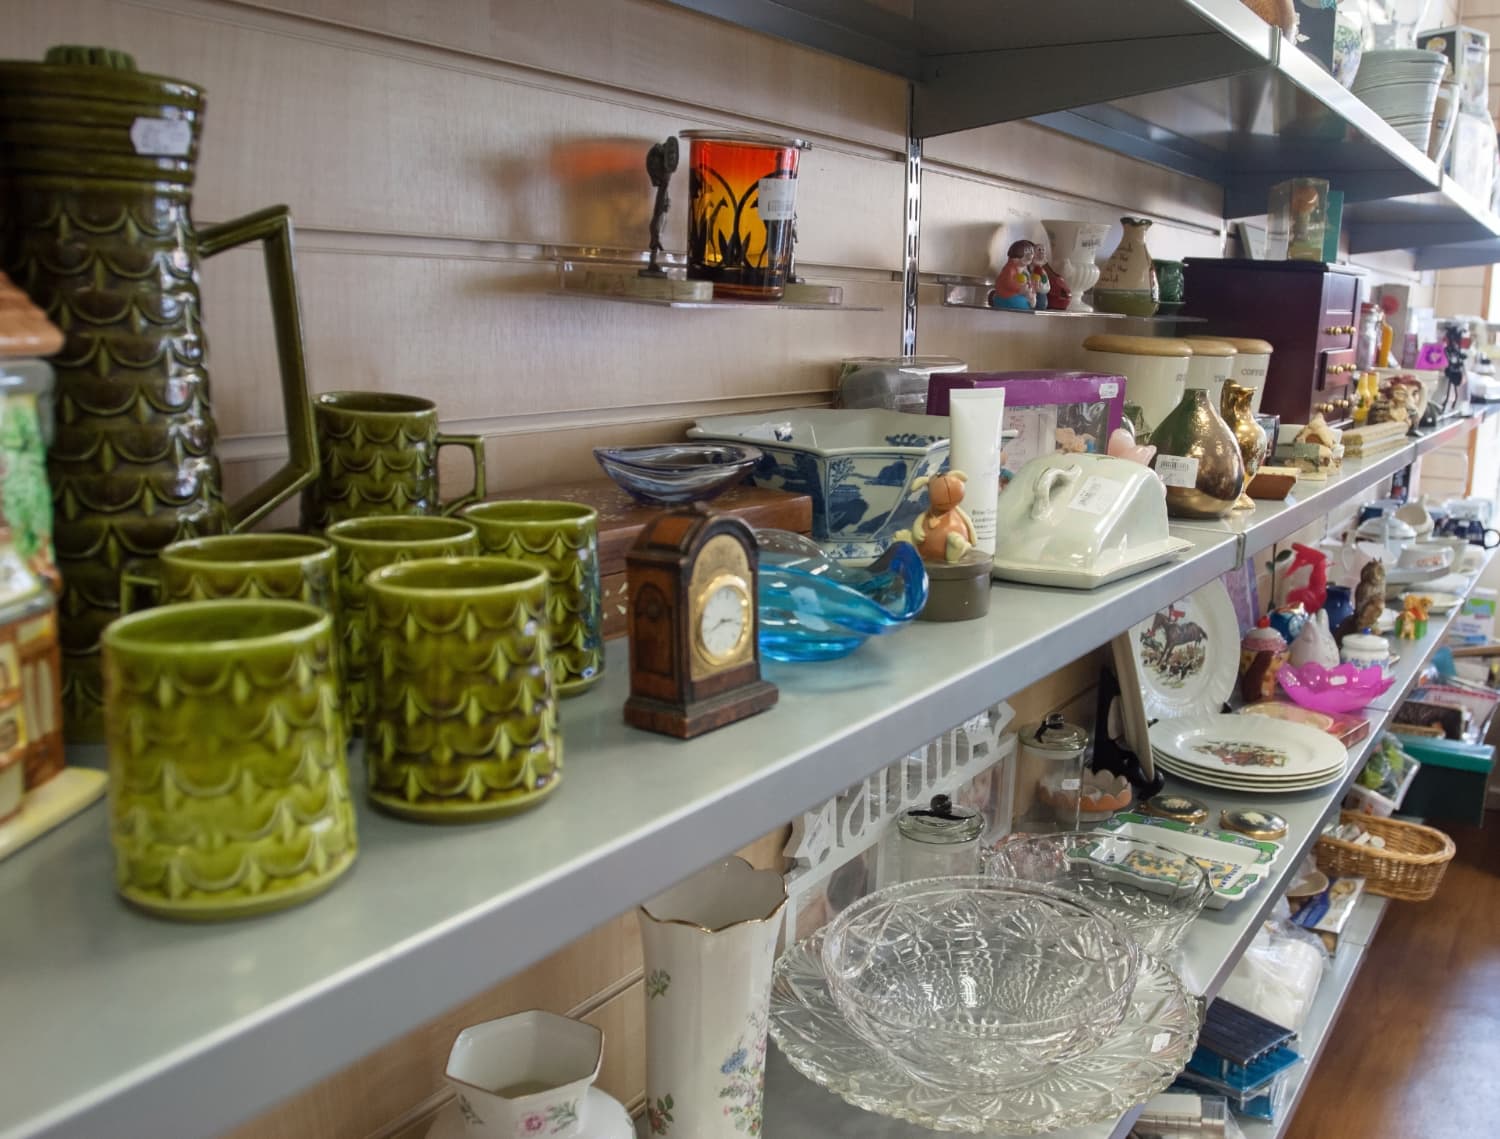 8 Things Even Designers Pick Up at Thrift Stores